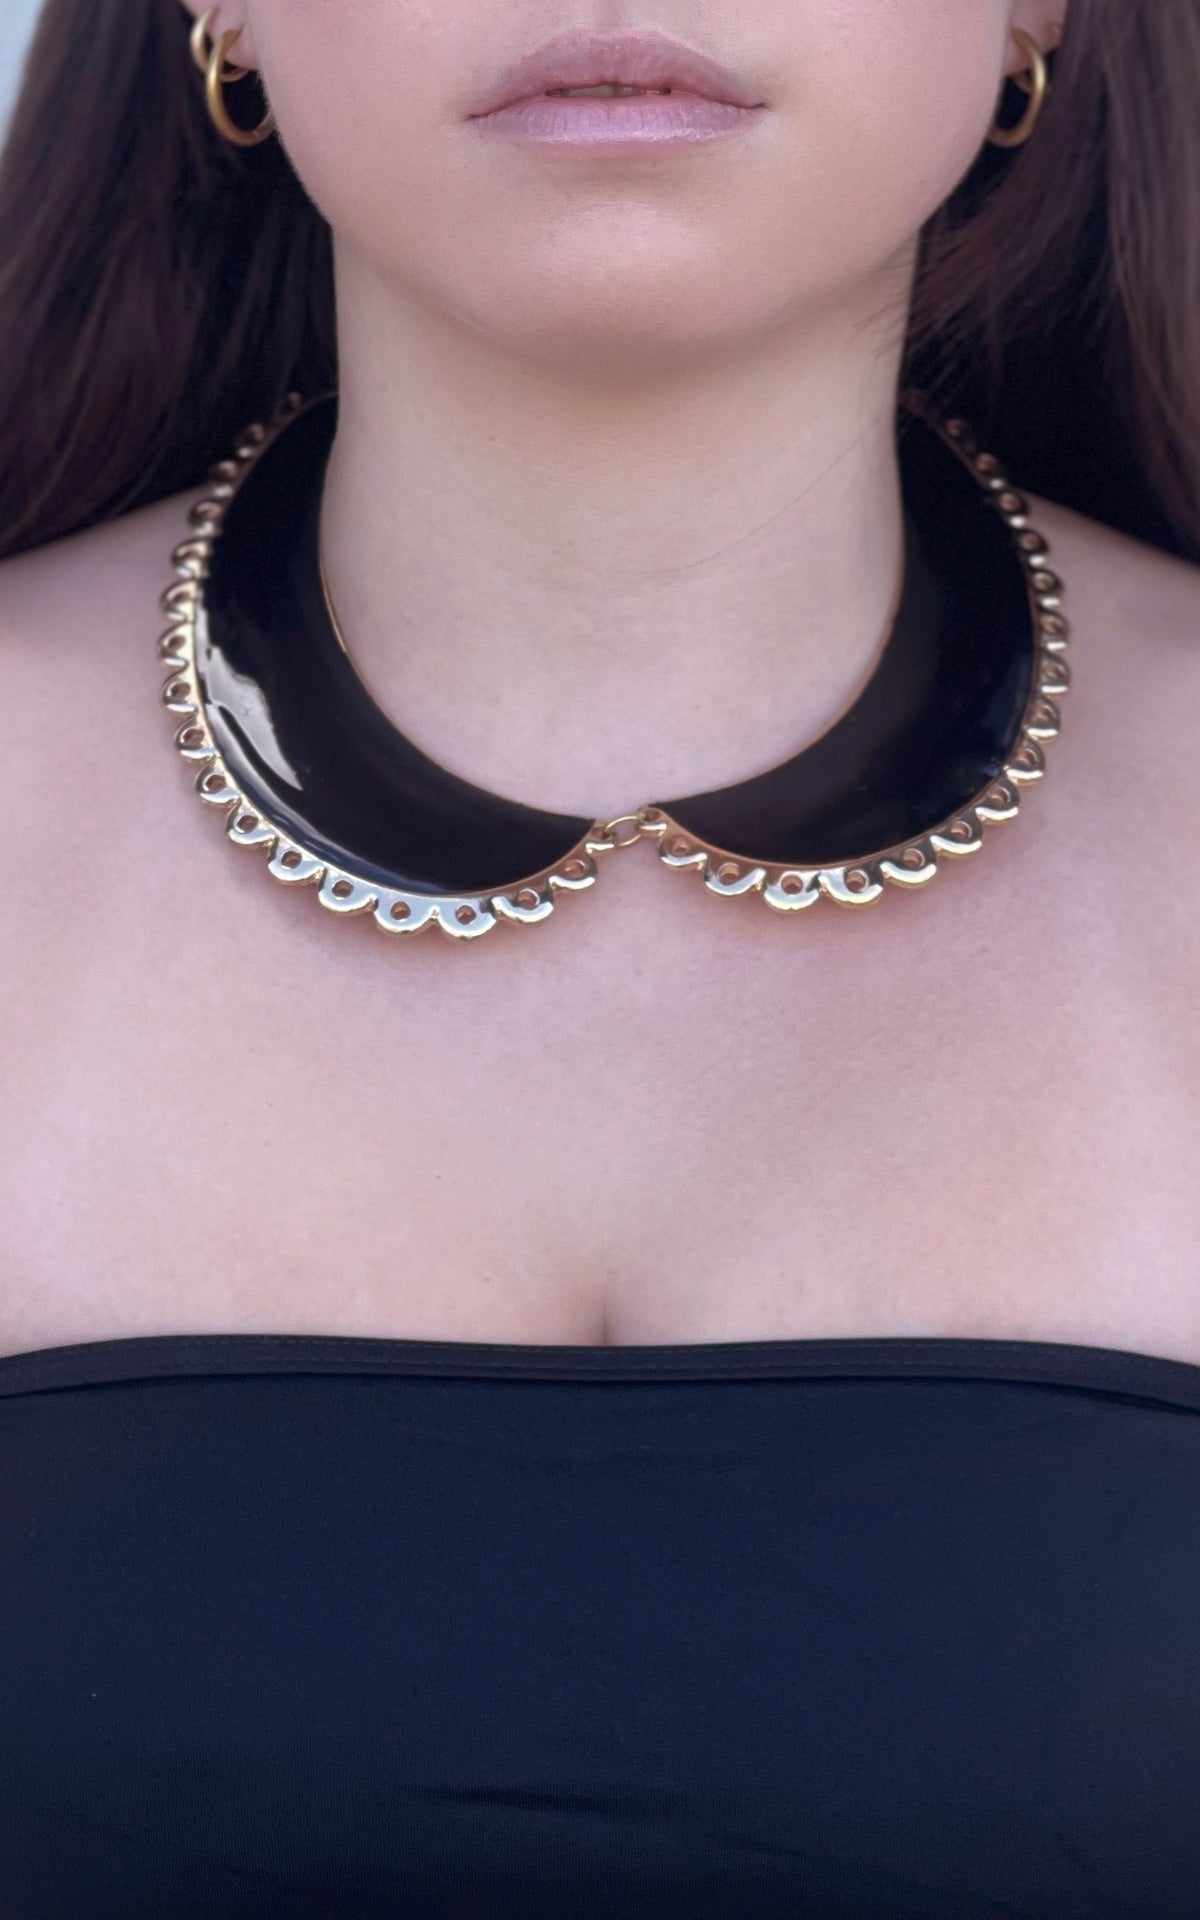 NECKLACE: Black Collar Necklace with Gold Detail